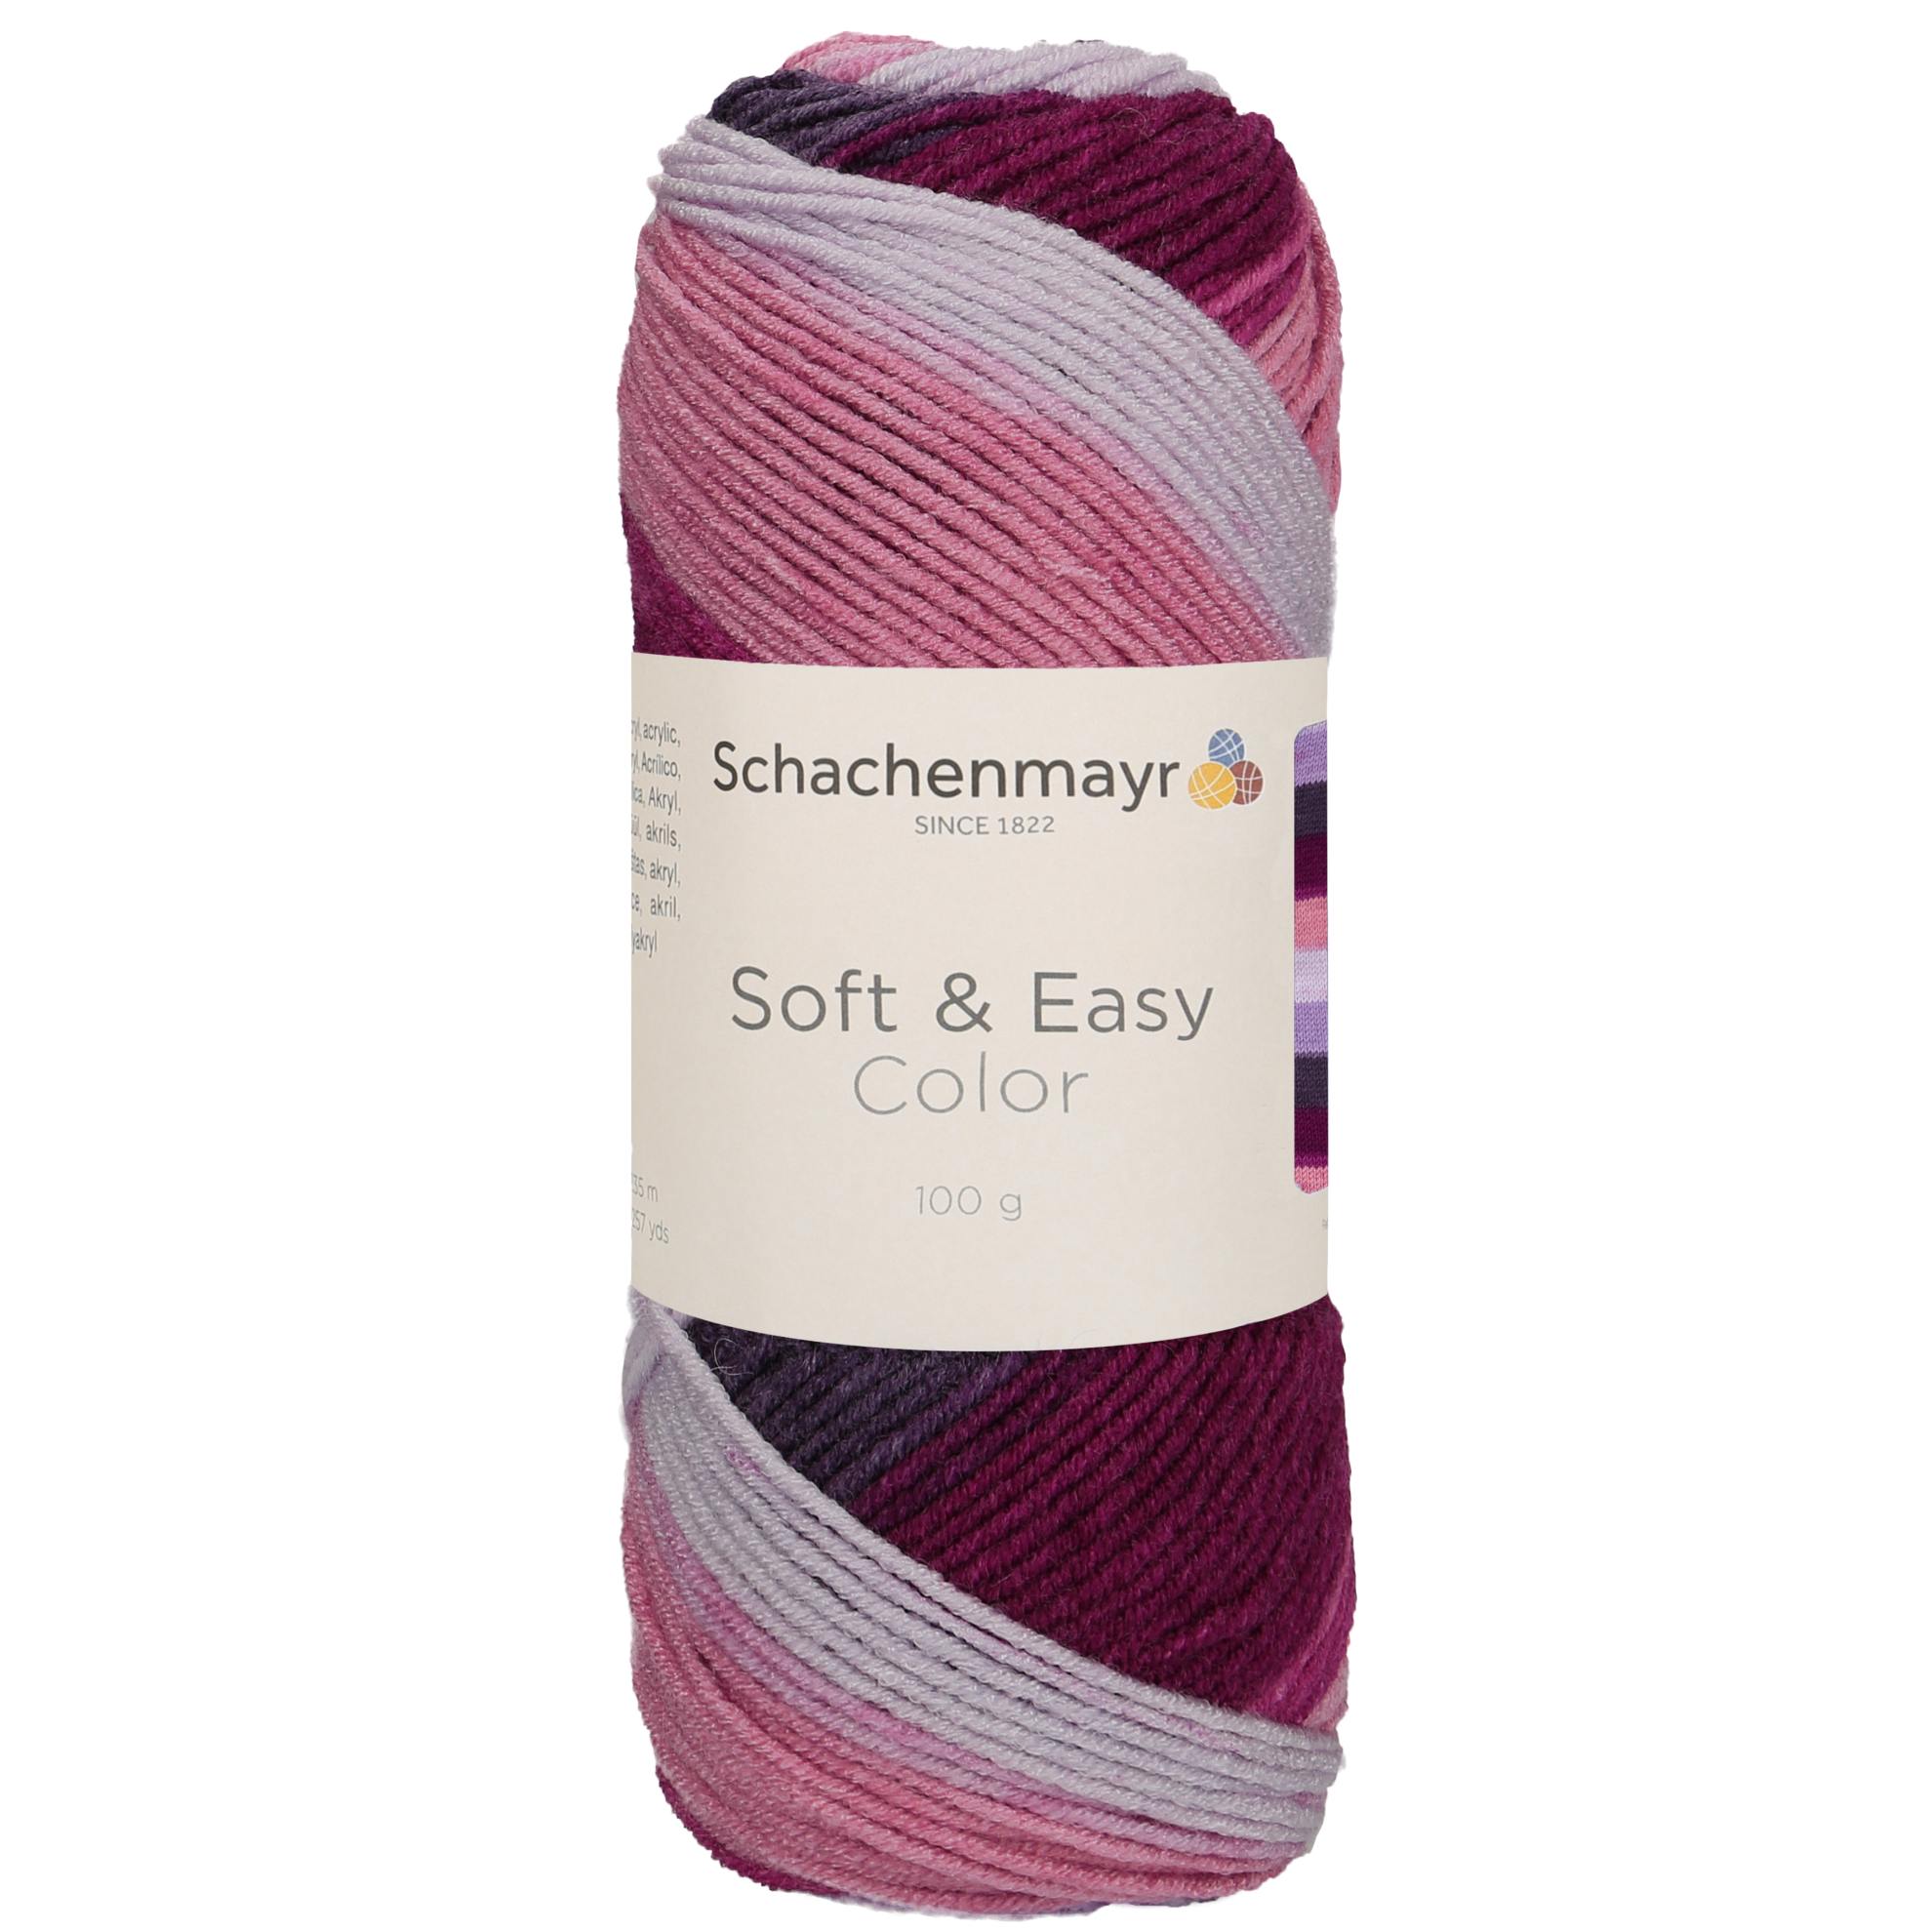 schachenmayr_soft_and_easy_color_00097